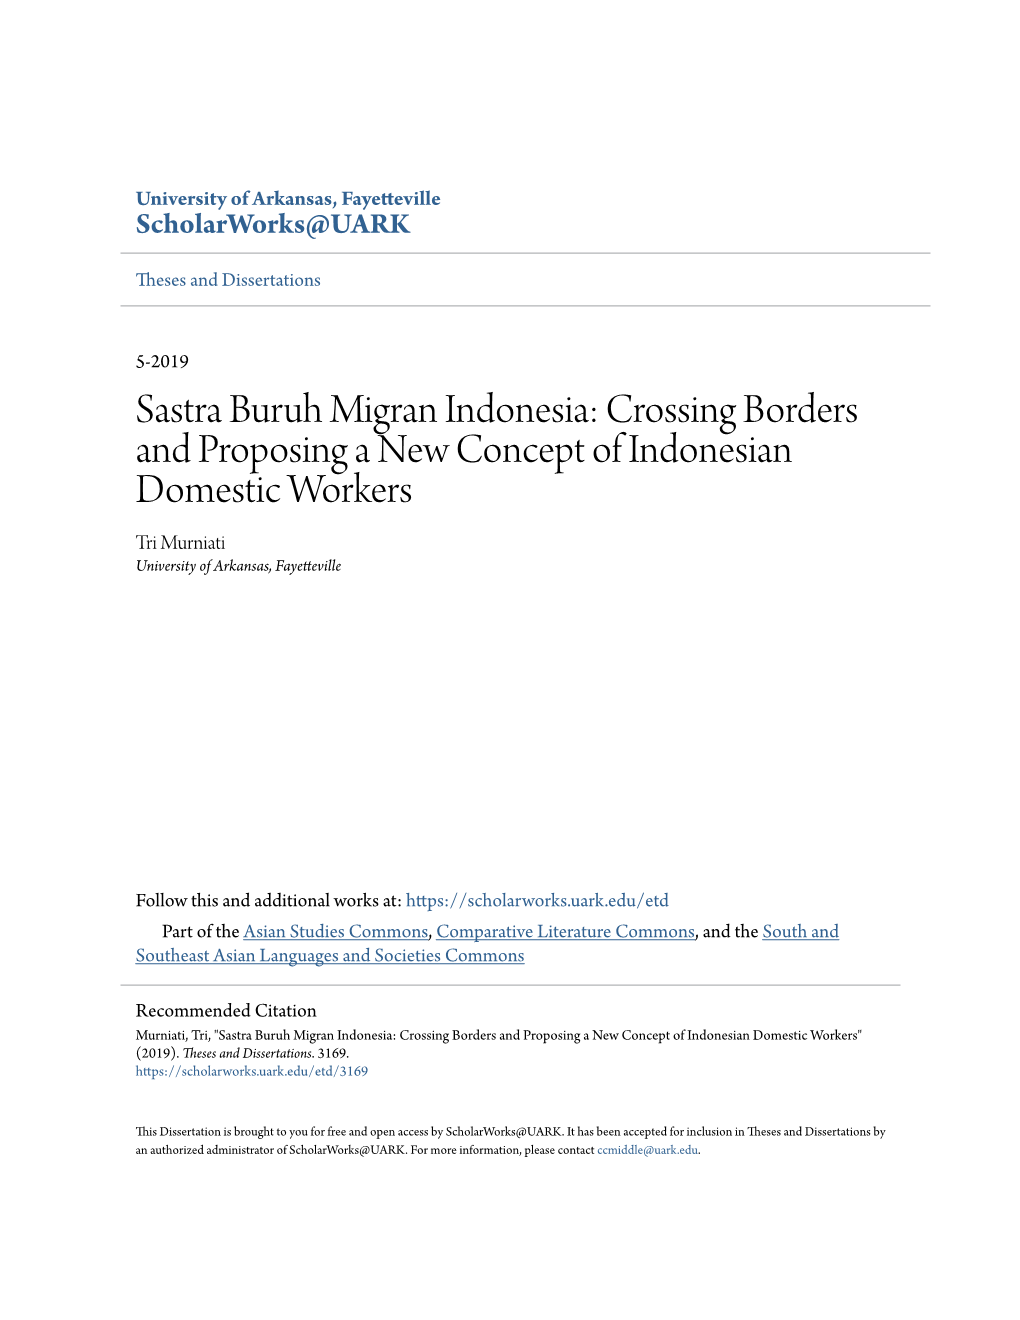 Sastra Buruh Migran Indonesia: Crossing Borders and Proposing a New Concept of Indonesian Domestic Workers Tri Murniati University of Arkansas, Fayetteville